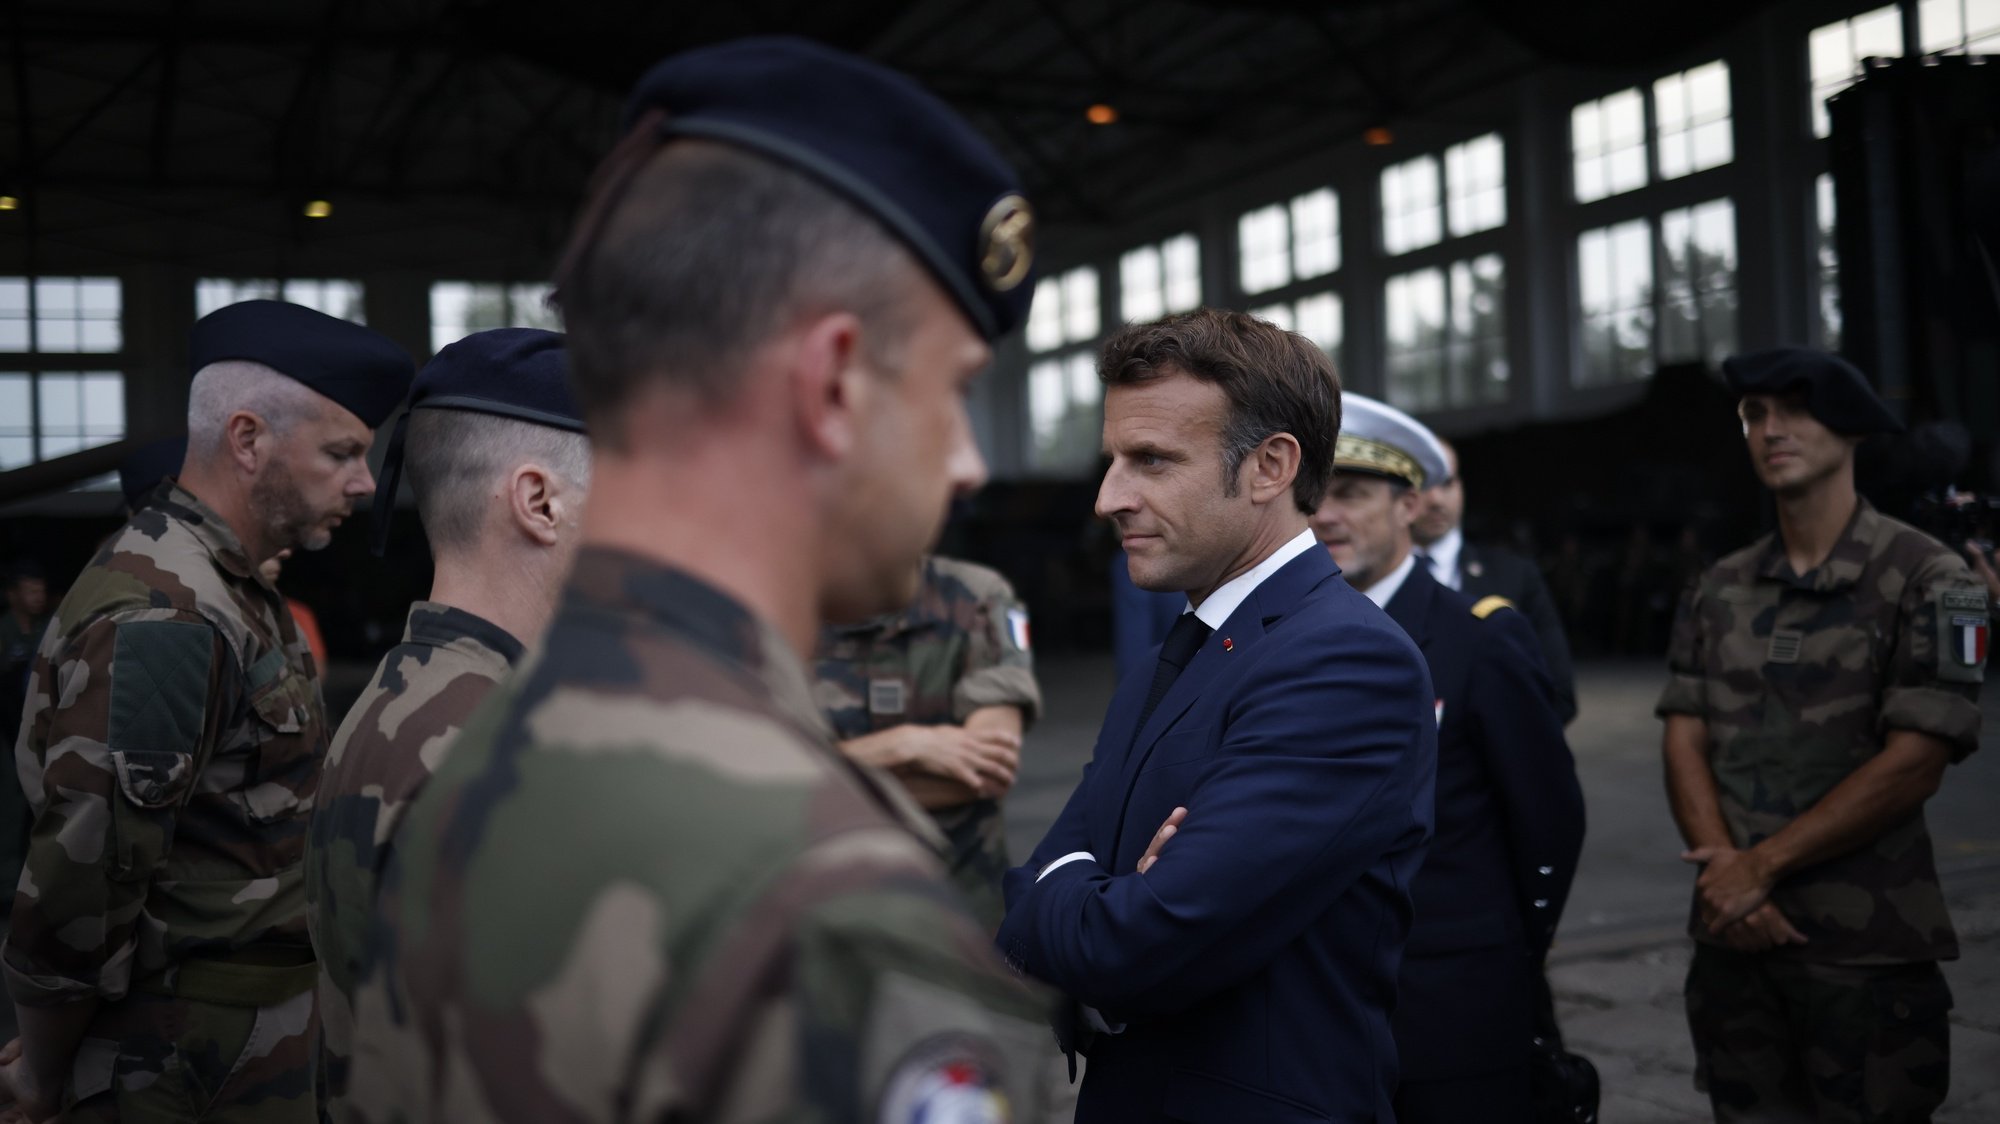 epaselect epa10012939 French President Emmanuel Macron (C), greets French soldiers on his arrival at the Mihail Kogalniceanu Air Base, near the city of Constanta, Romania, 14 June 2022. French President Macron will make a visit to the airbase. French and Belgian troops are deployed in Romania with the NATO Response Force as part of Mission AIGLE.  EPA/YOAN VALAT / POOL